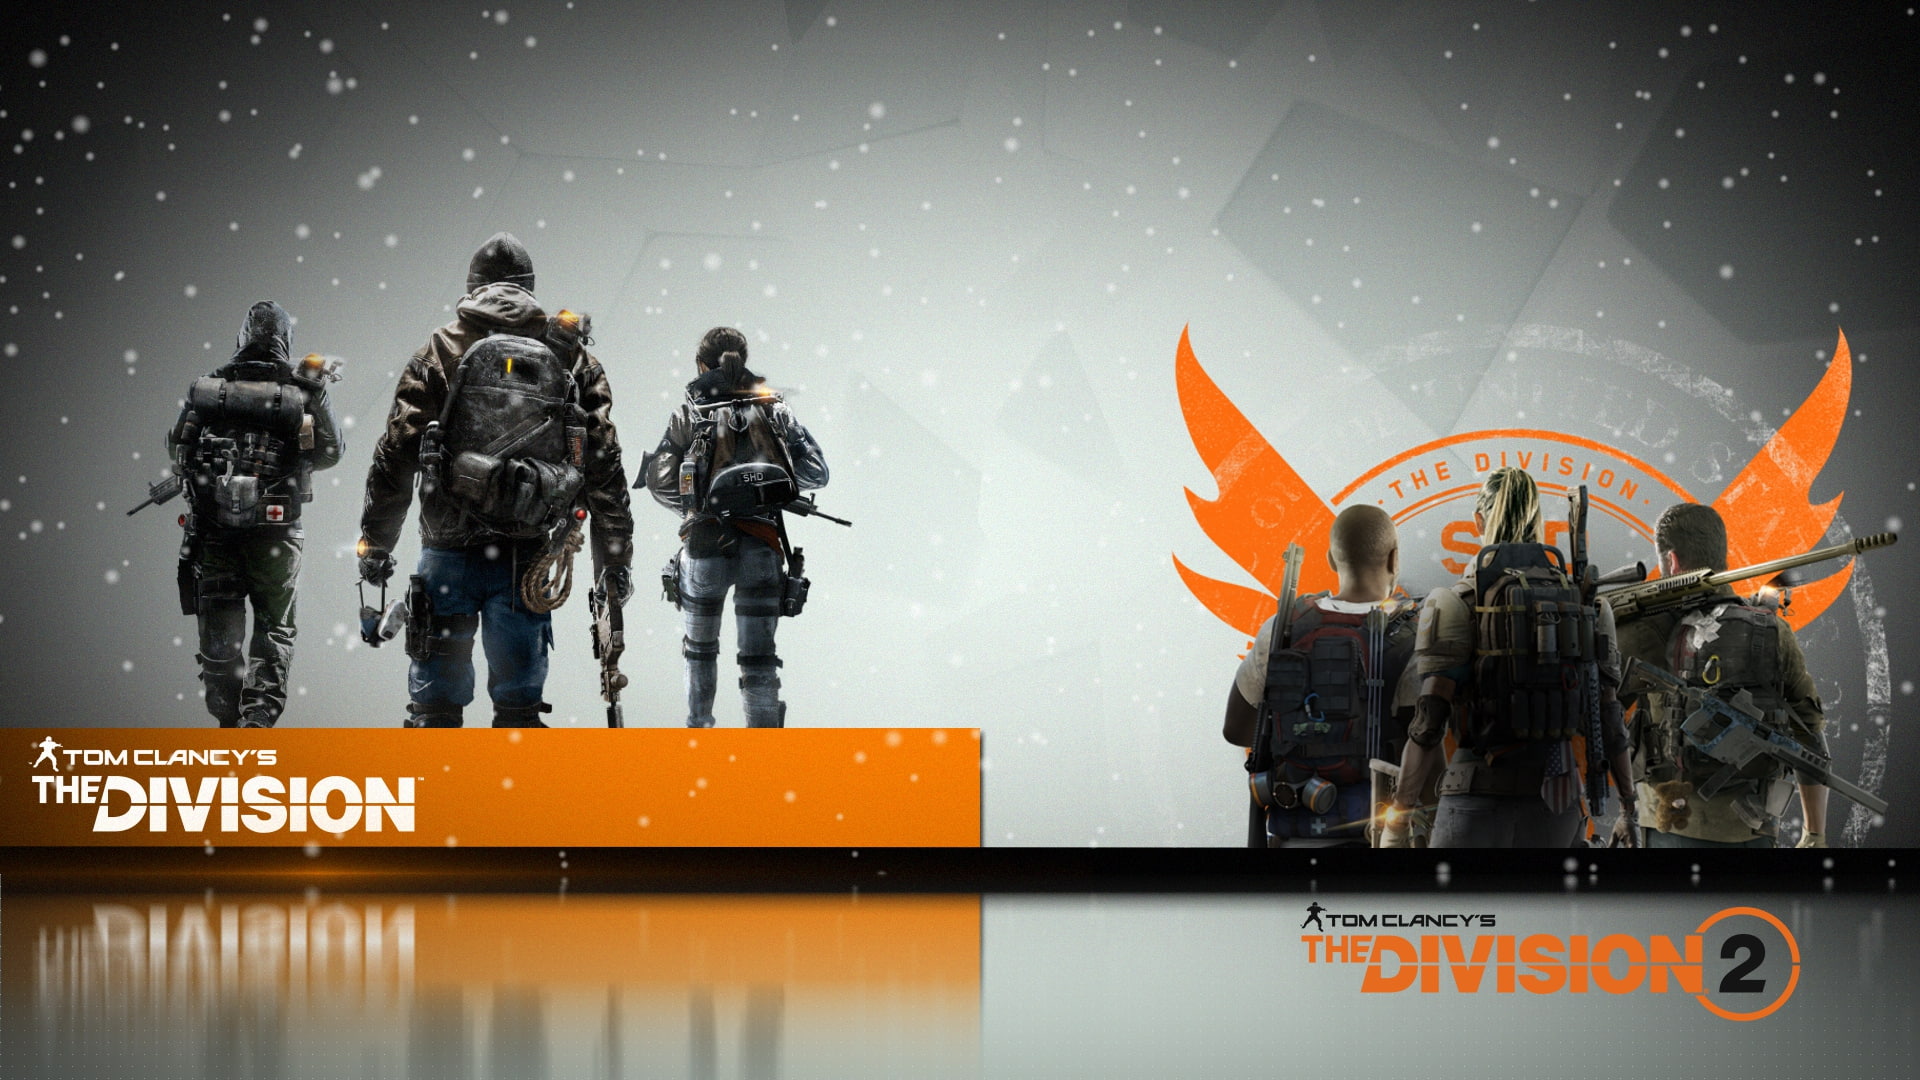 Tom Clancy's The Division, Tom Clancy's The Division 2, video games